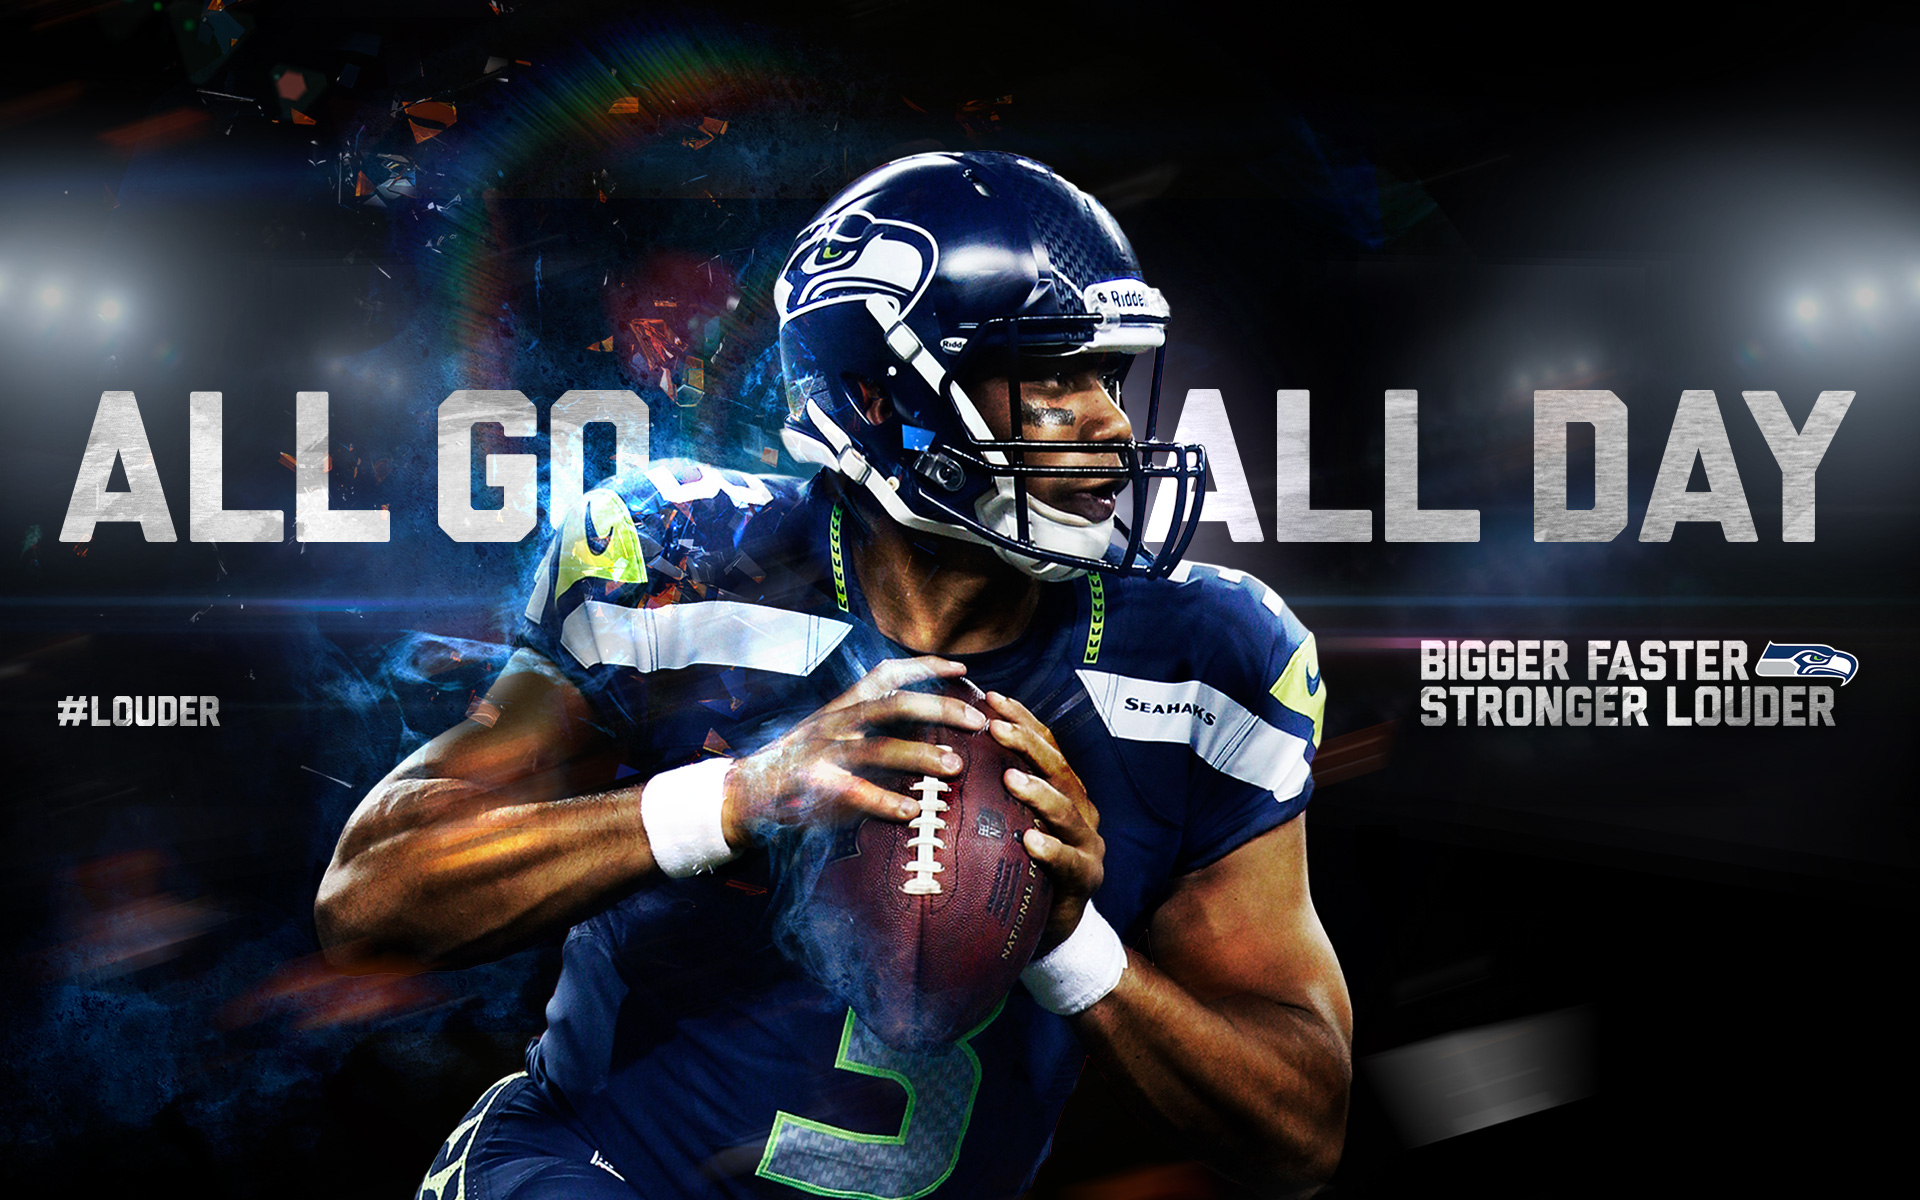  Seahawks NFL Background Full 1080p Ultra HD Wallpapers